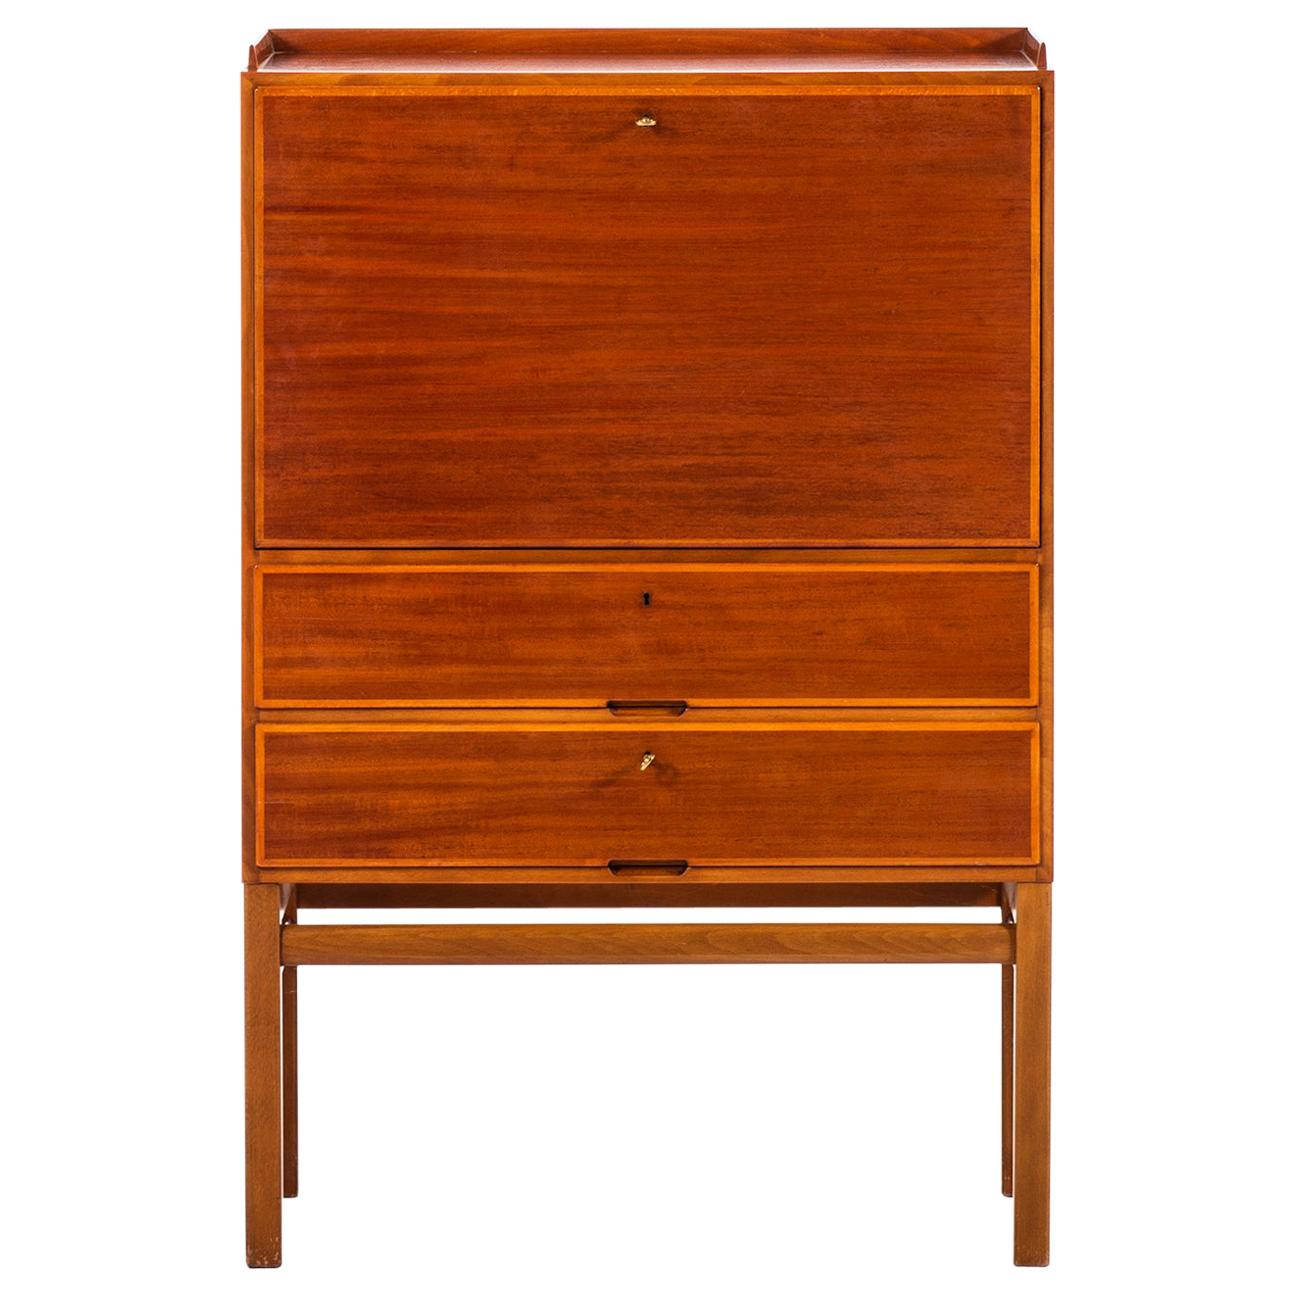 Axel Larsson Cabinet Produced by Bodafors in Sweden